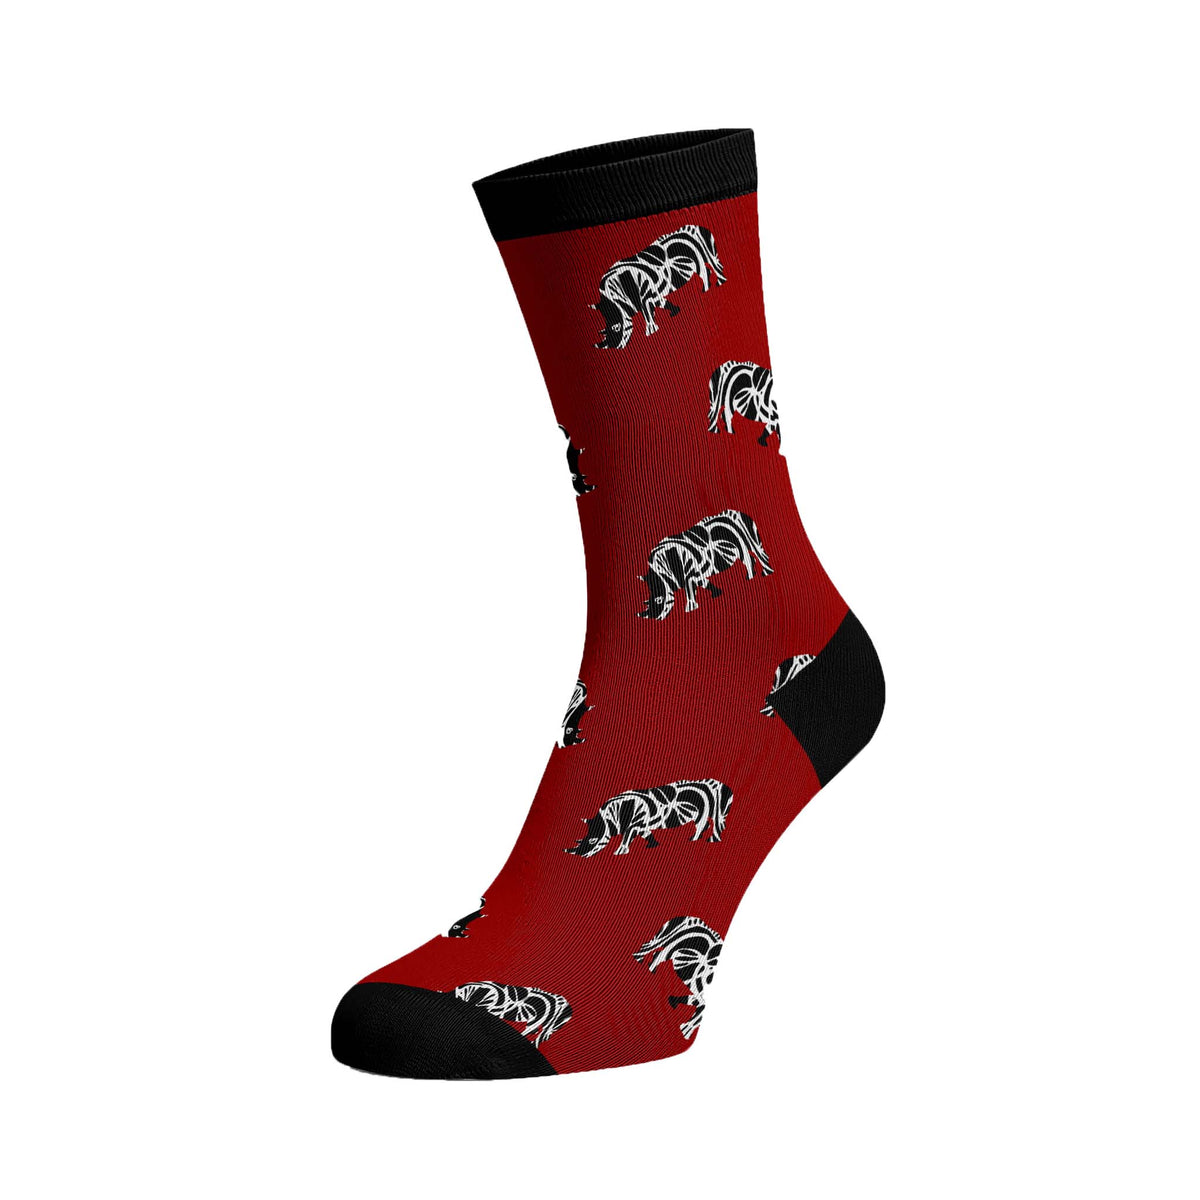 Hansie en Grietjie critically endangered socks featuring a Black Rhino design, supporting conservation efforts in Africa.